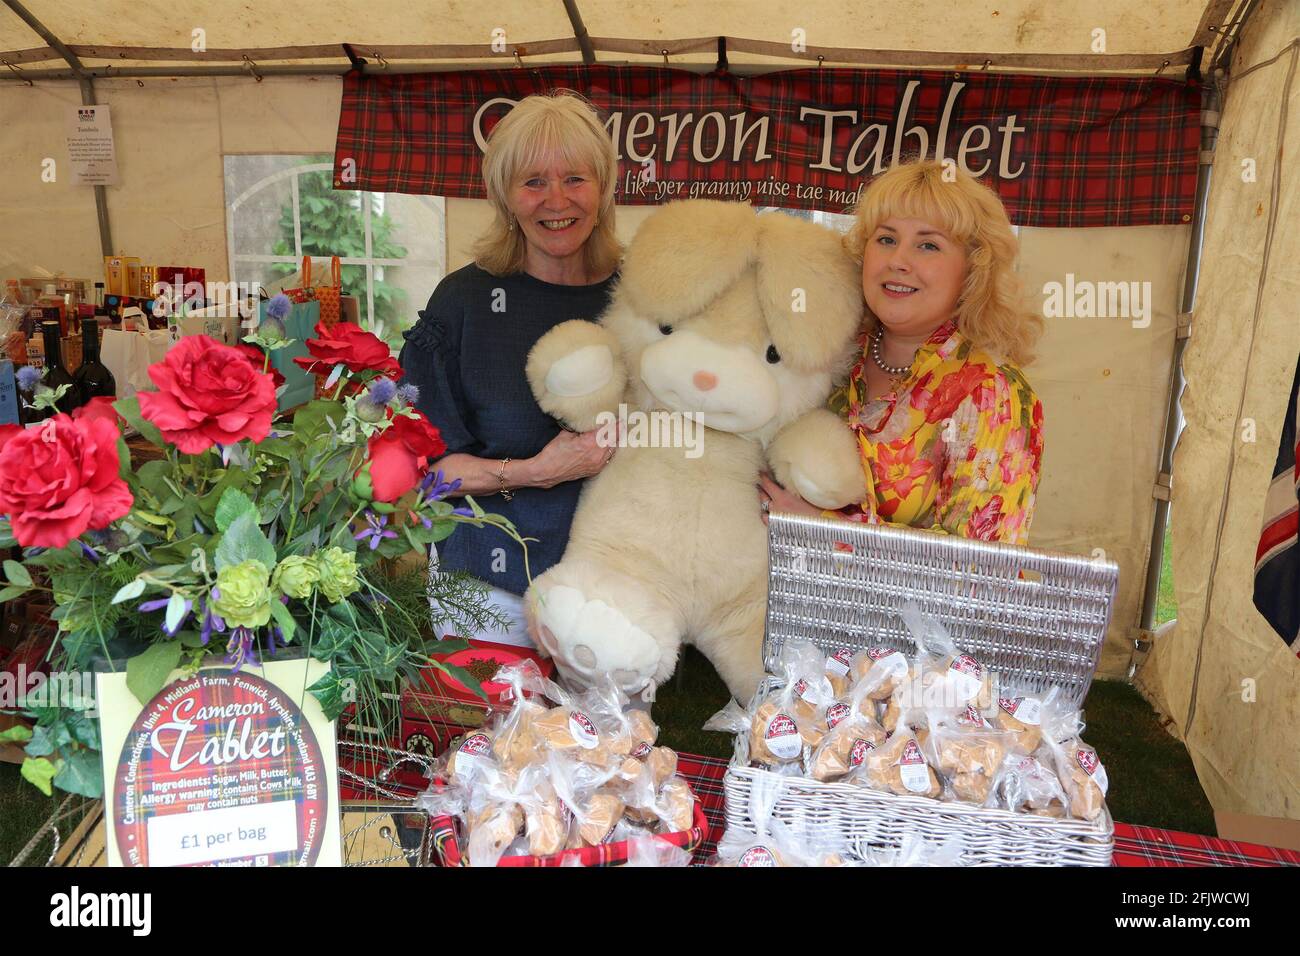 HollyBush, Ayrshire , Scotland, UK. 02 Jun 2018. Hollybush house is the location for the military support service Combat Stress. Every July a Gala day is held to raise funds and awareness. Local business Cameron Tablets with a raffle prize Stock Photo